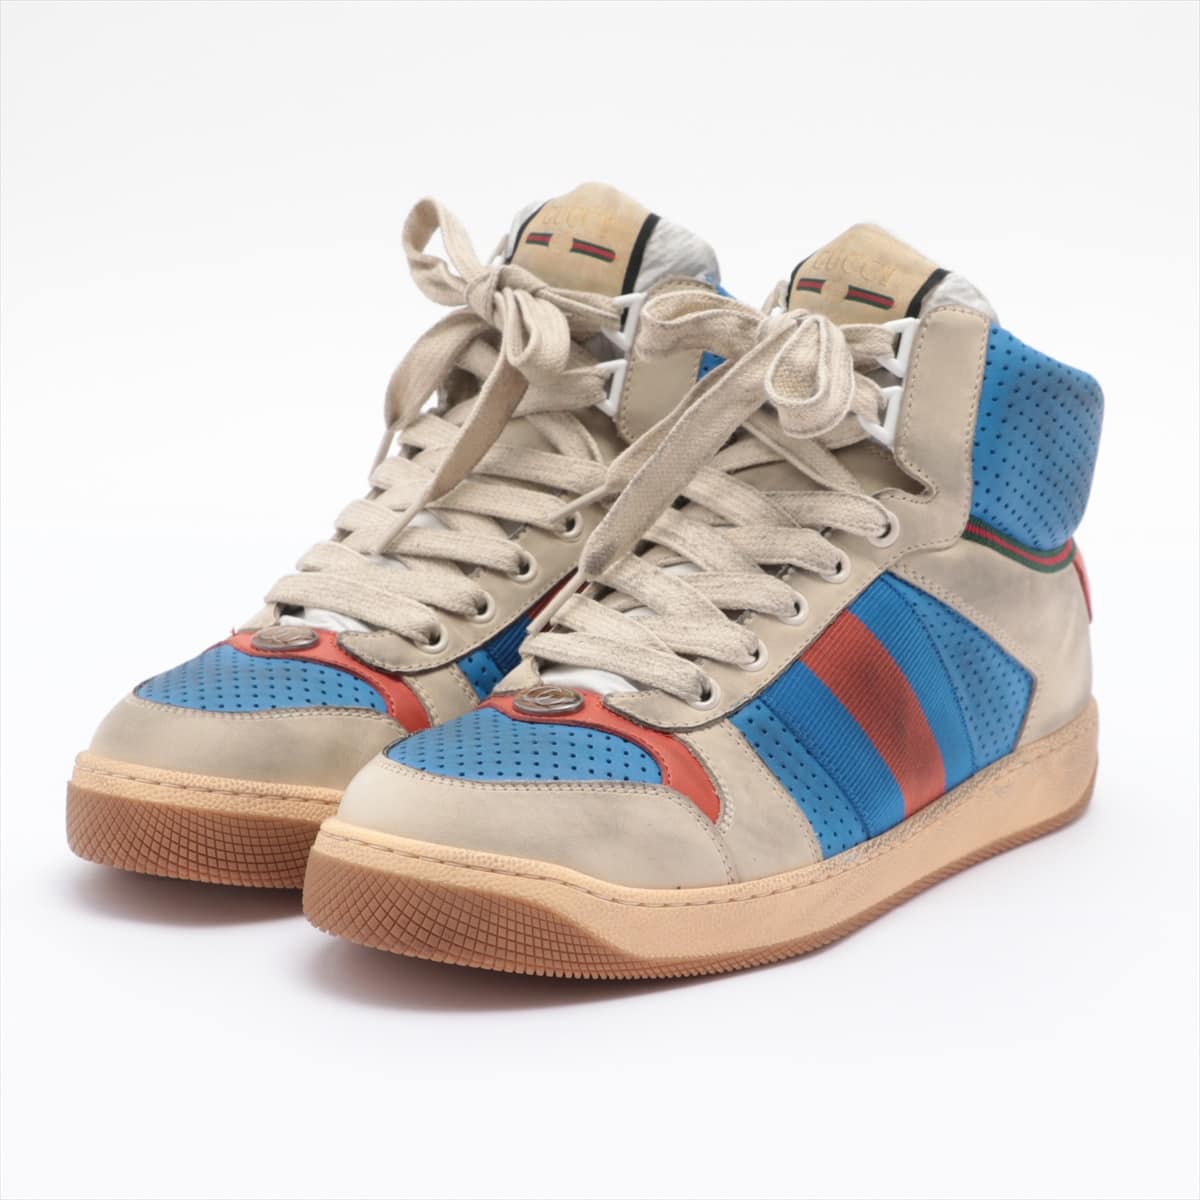 Gucci Screener Leather High-top Sneakers 5 1/2 Men's Multicolor Vintage processing